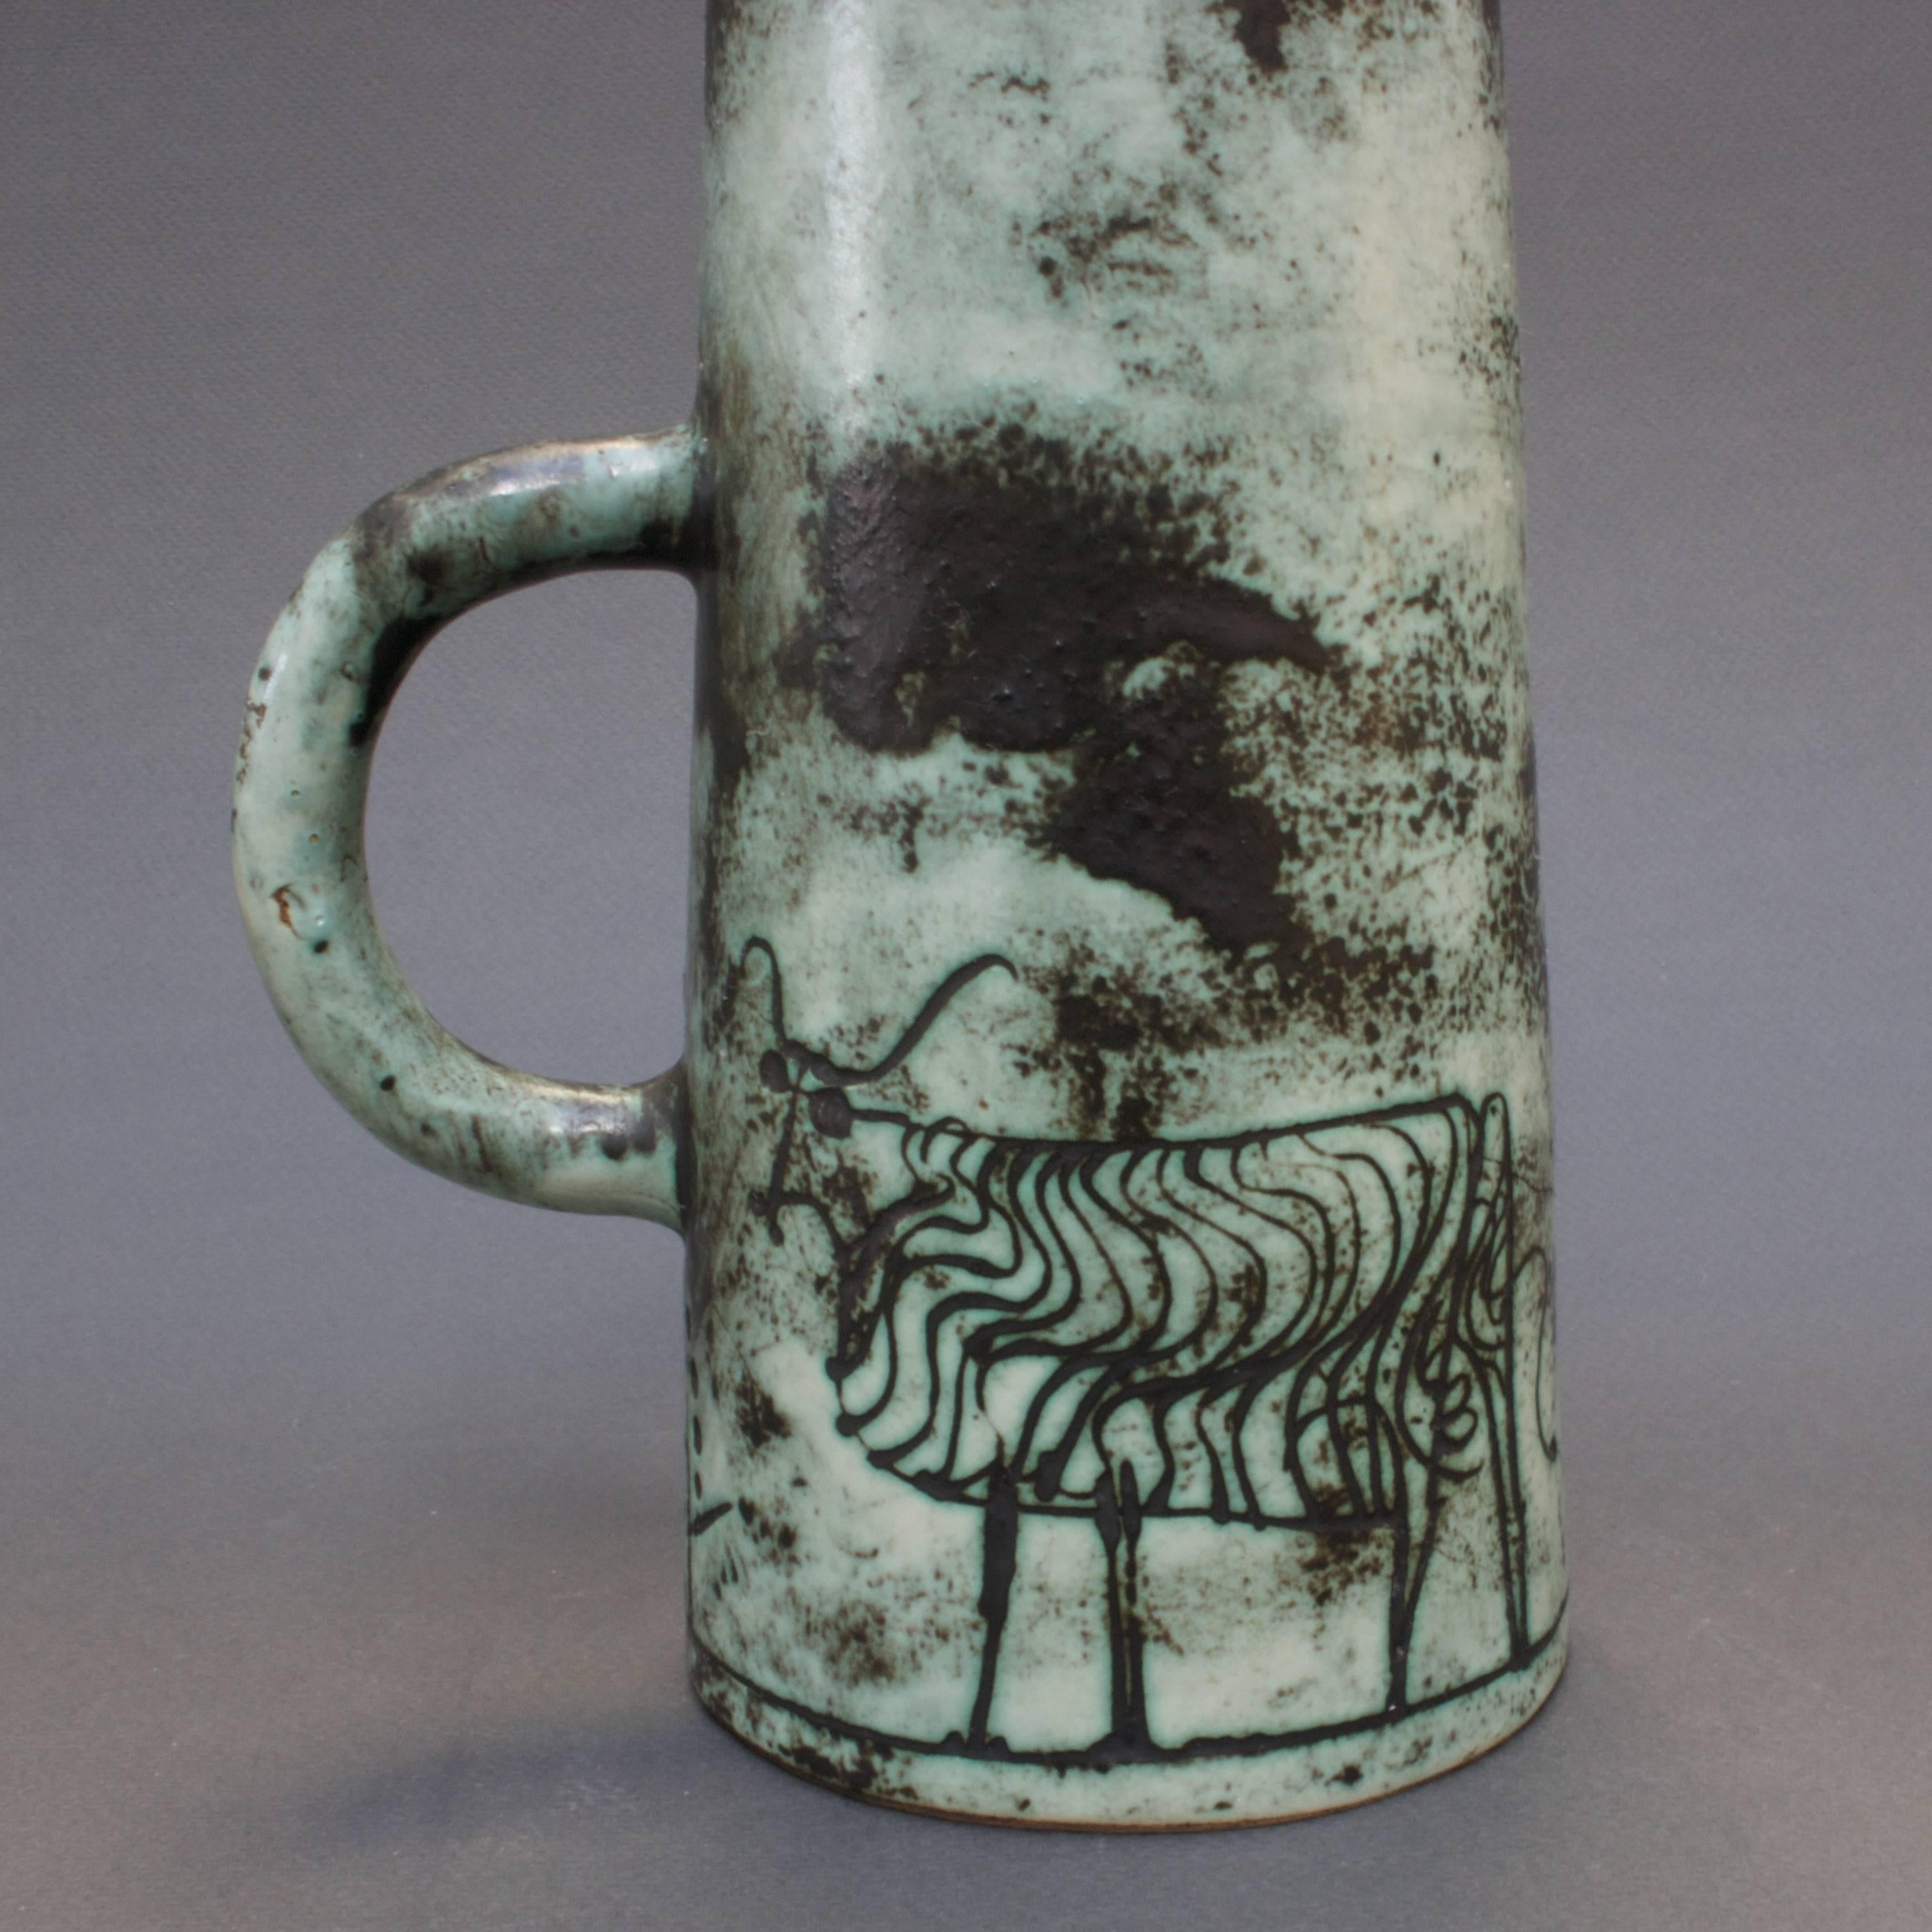 20th Century Ceramic Pitcher by Jacques Blin, Vallauris, France, circa 1950s - 60s